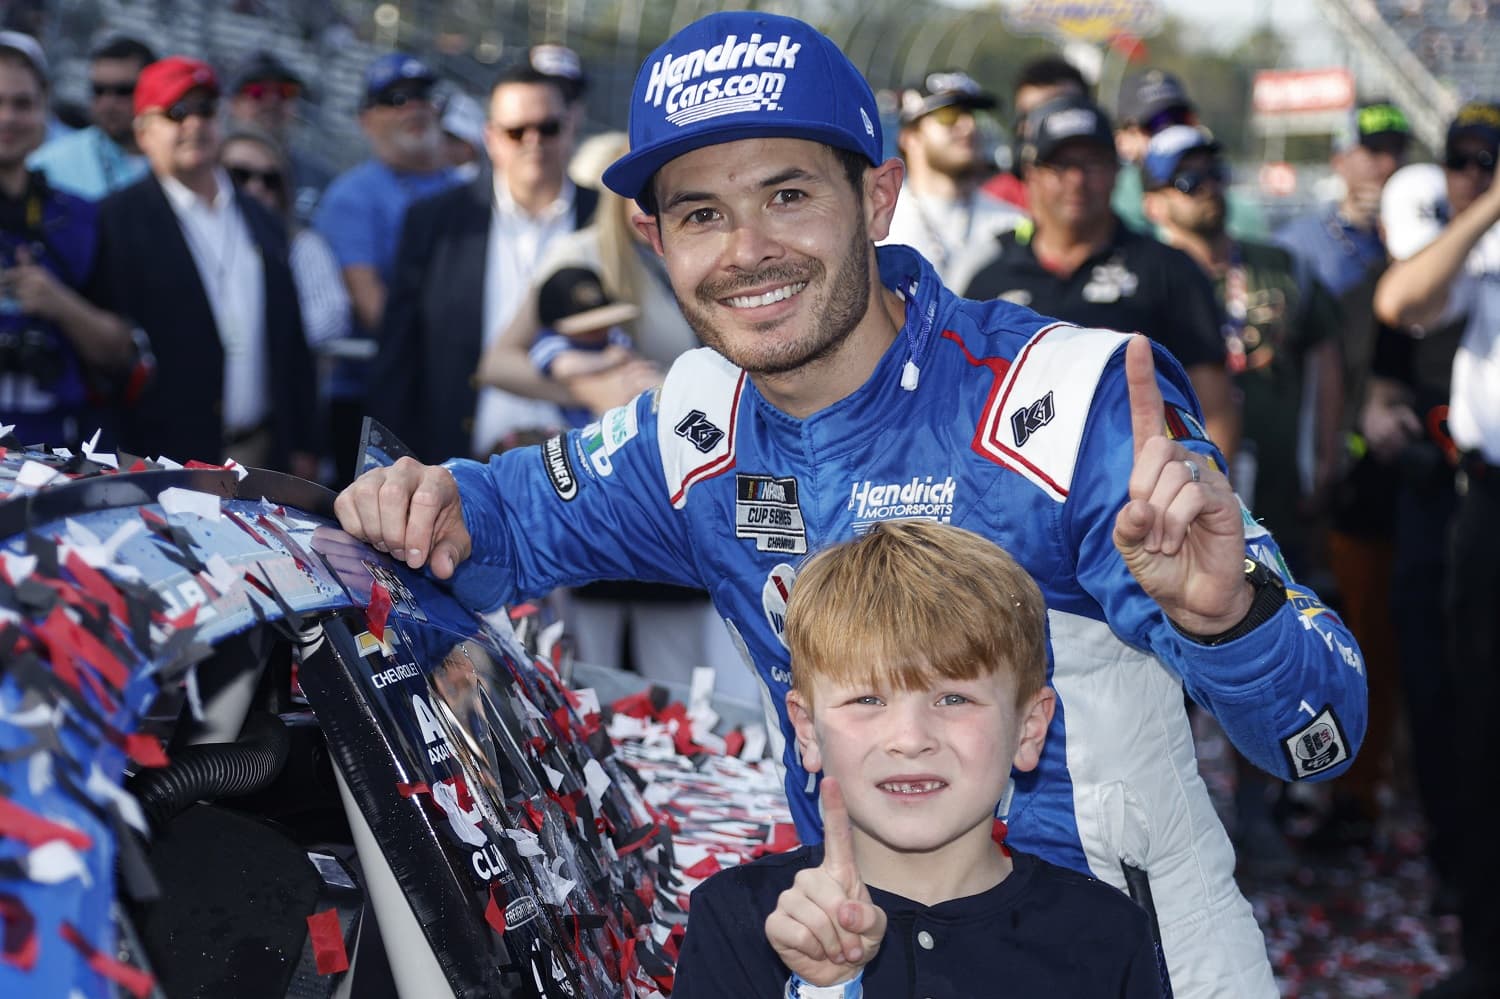 Kyle Larson and son Owen pose next to his winner sticker on his car after winning the NASCAR Cup Series NOCO 400 at Martinsville Speedway on April 16, 2023. | Sean Gardner/Getty Images